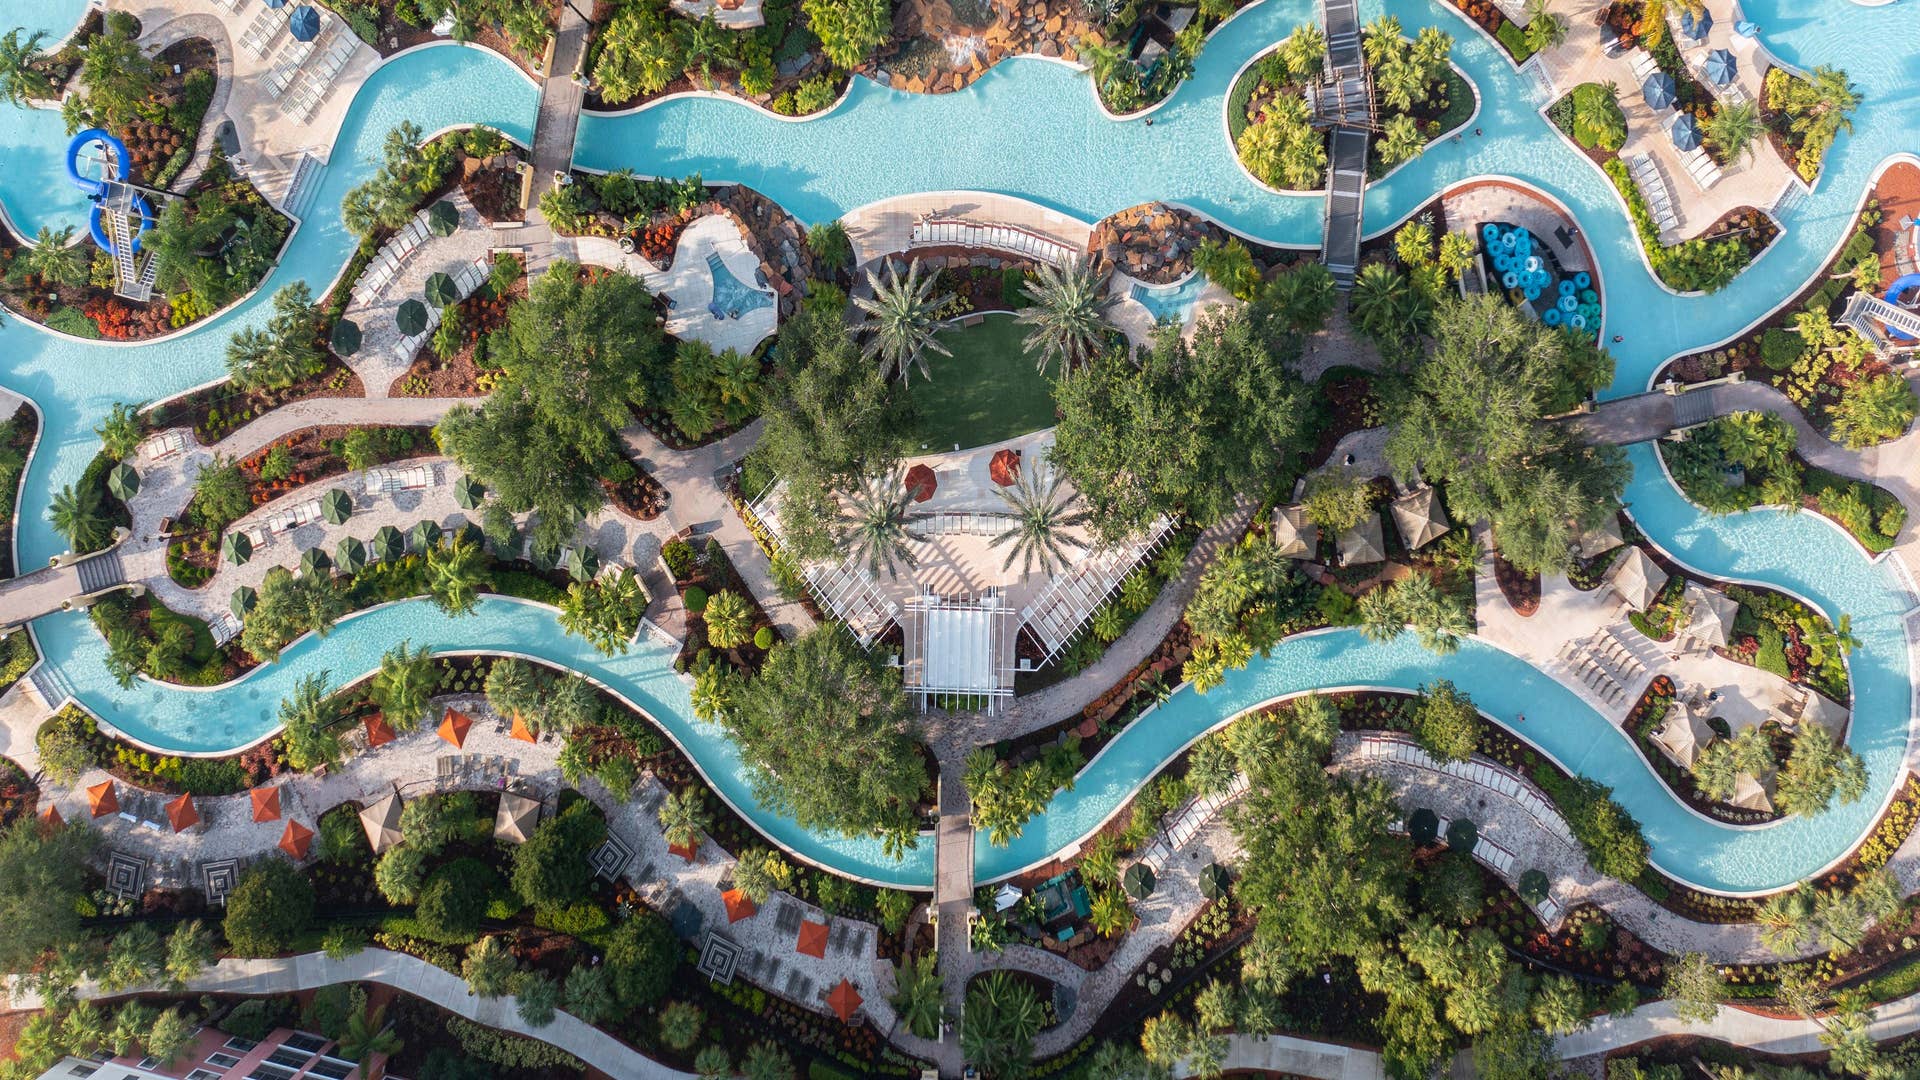 Orange Lake Resort Aerial View Of Lazy River Hero 4320x2048 ?auto=webp&disable=upscale&quality=70&width=1920&height=1080&fit=crop